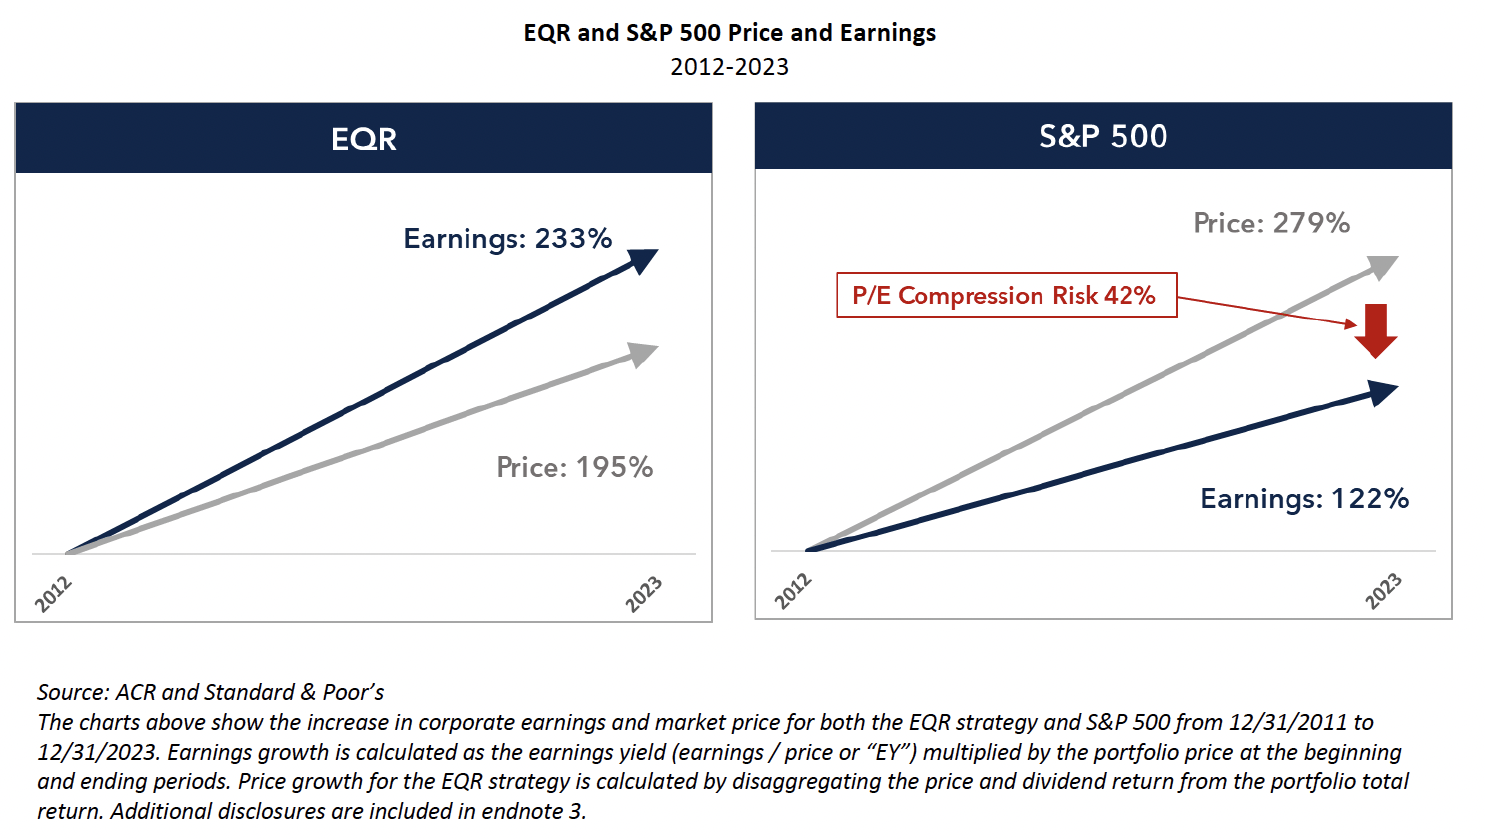 EQR and S&P 500 Price and Earnings 2012-2023